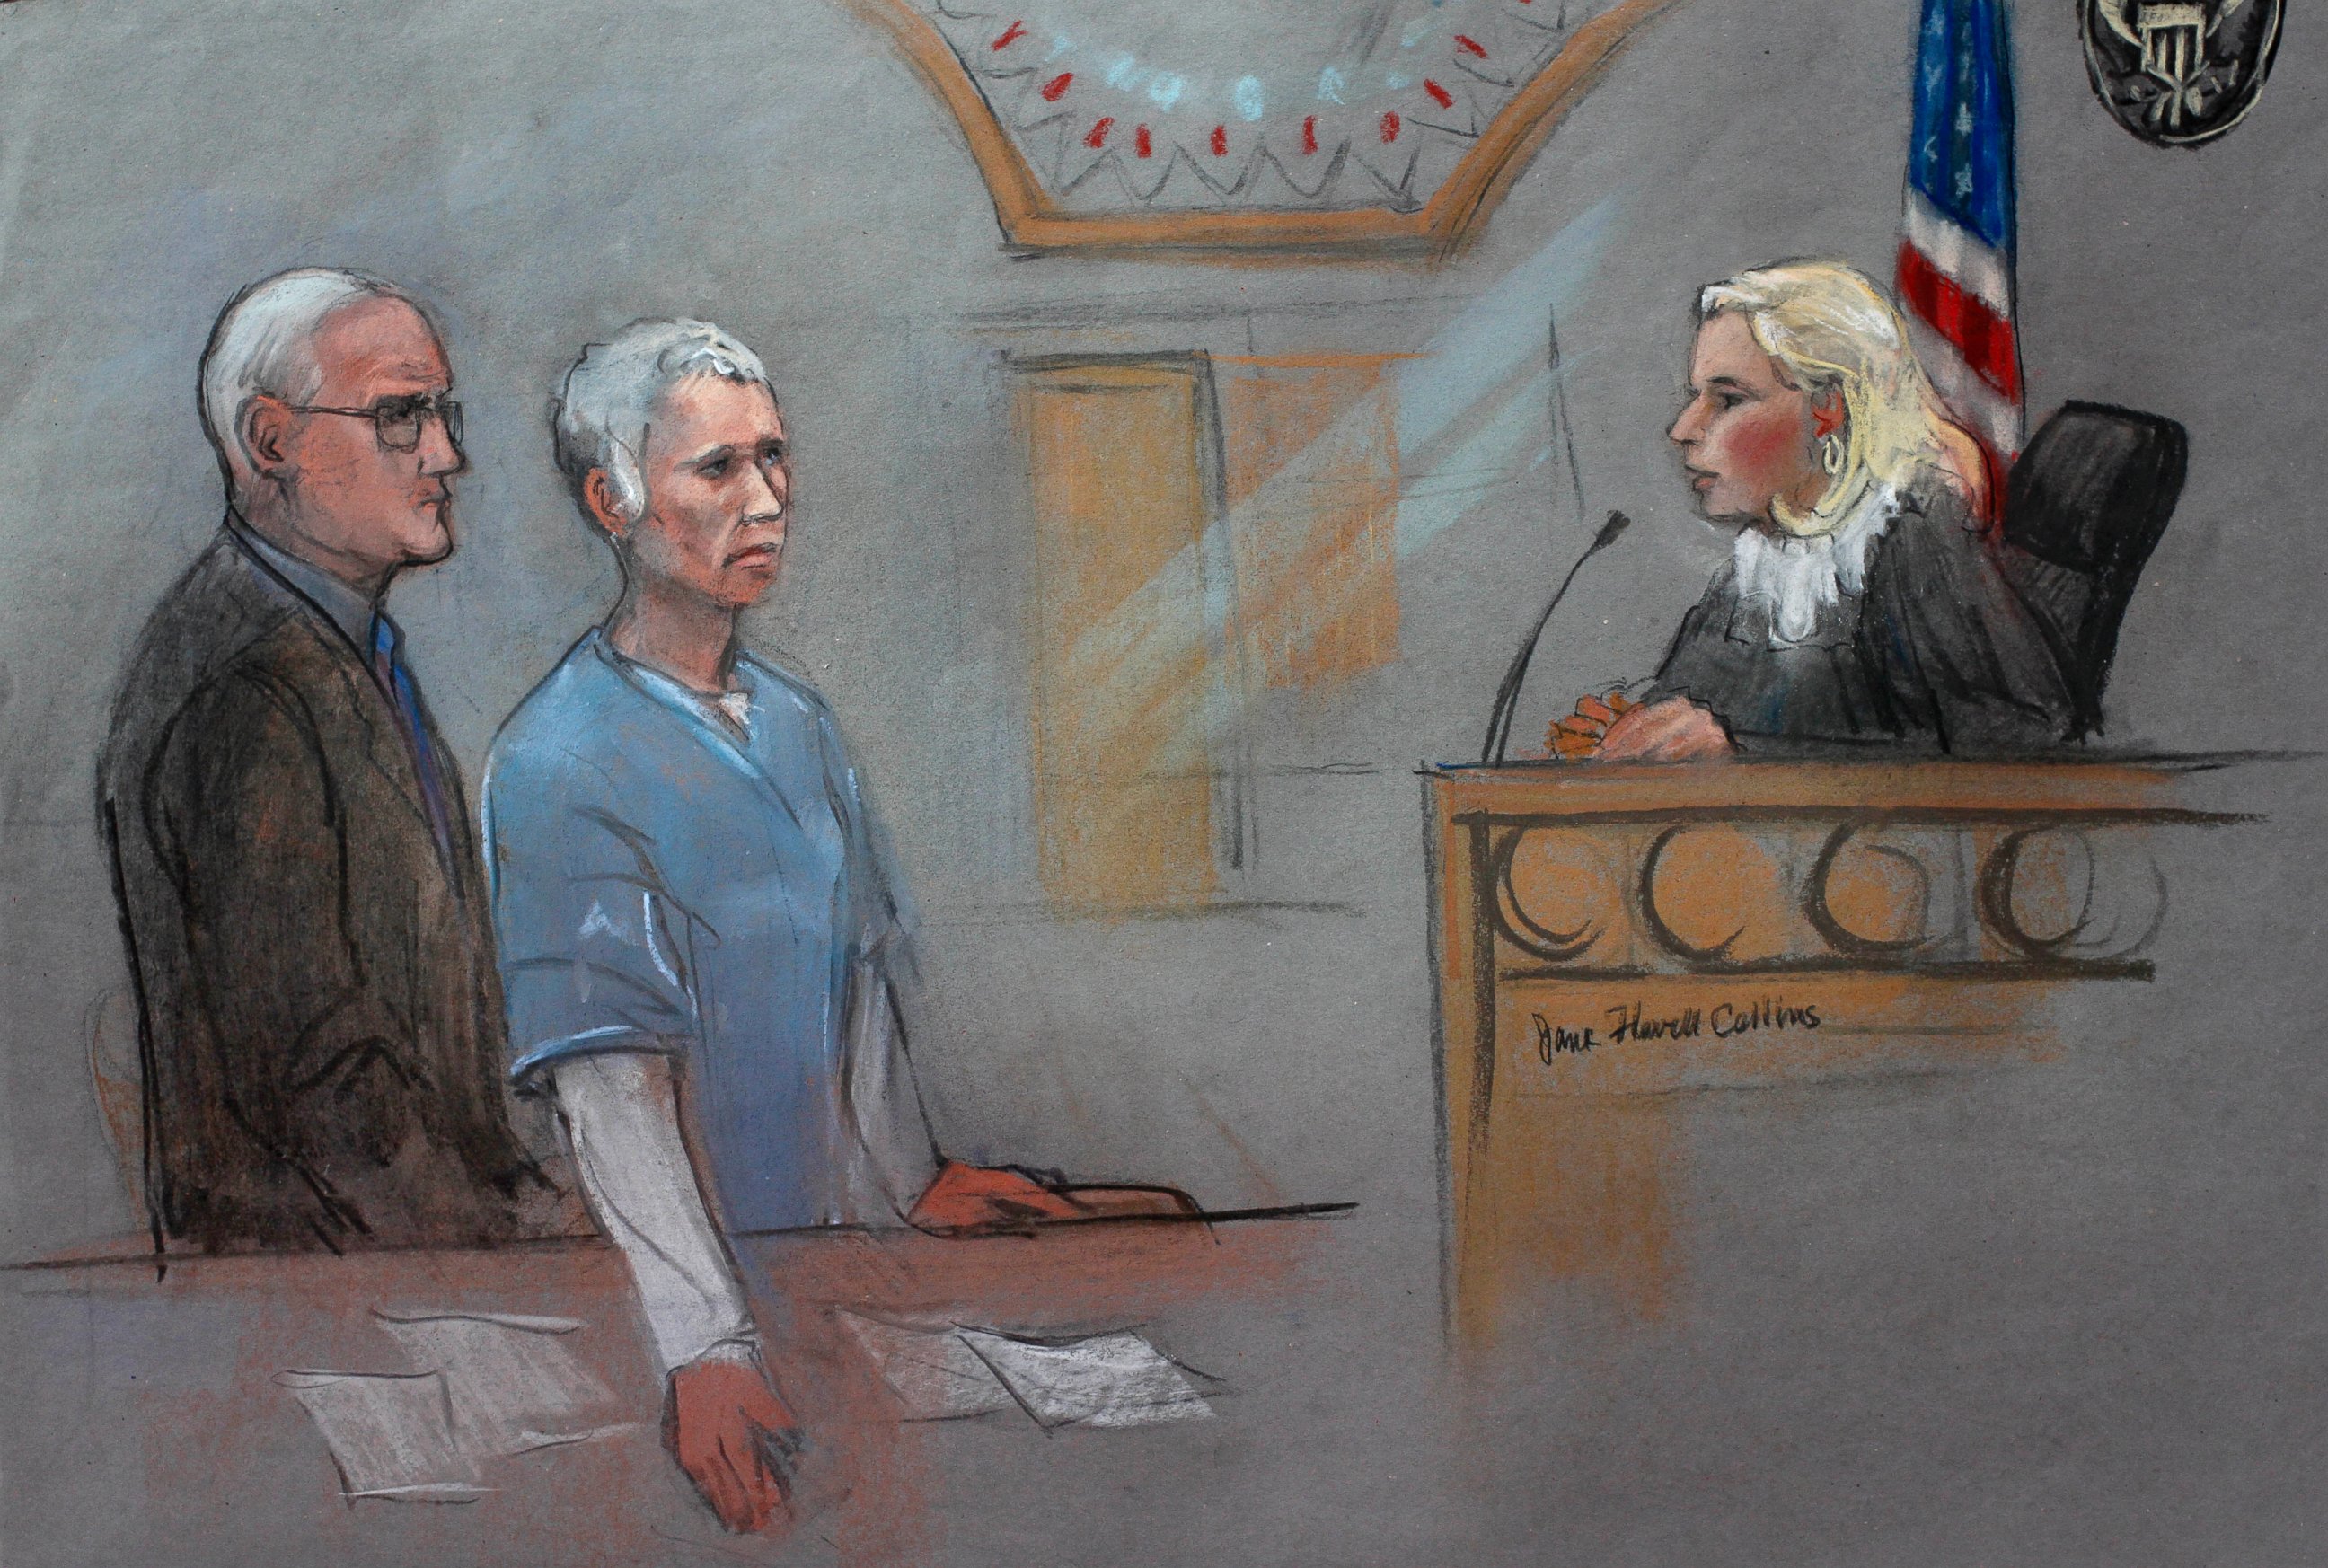 PHOTO: Catherine Greig, the longtime girlfriend of Whitey Bulger, is depicted with her lawyer Kevin Reddington before U.S. District Court Magistrate Judge Marianne Bowler during a hearing, Oct. 19, 2015, in federal court in Boston.